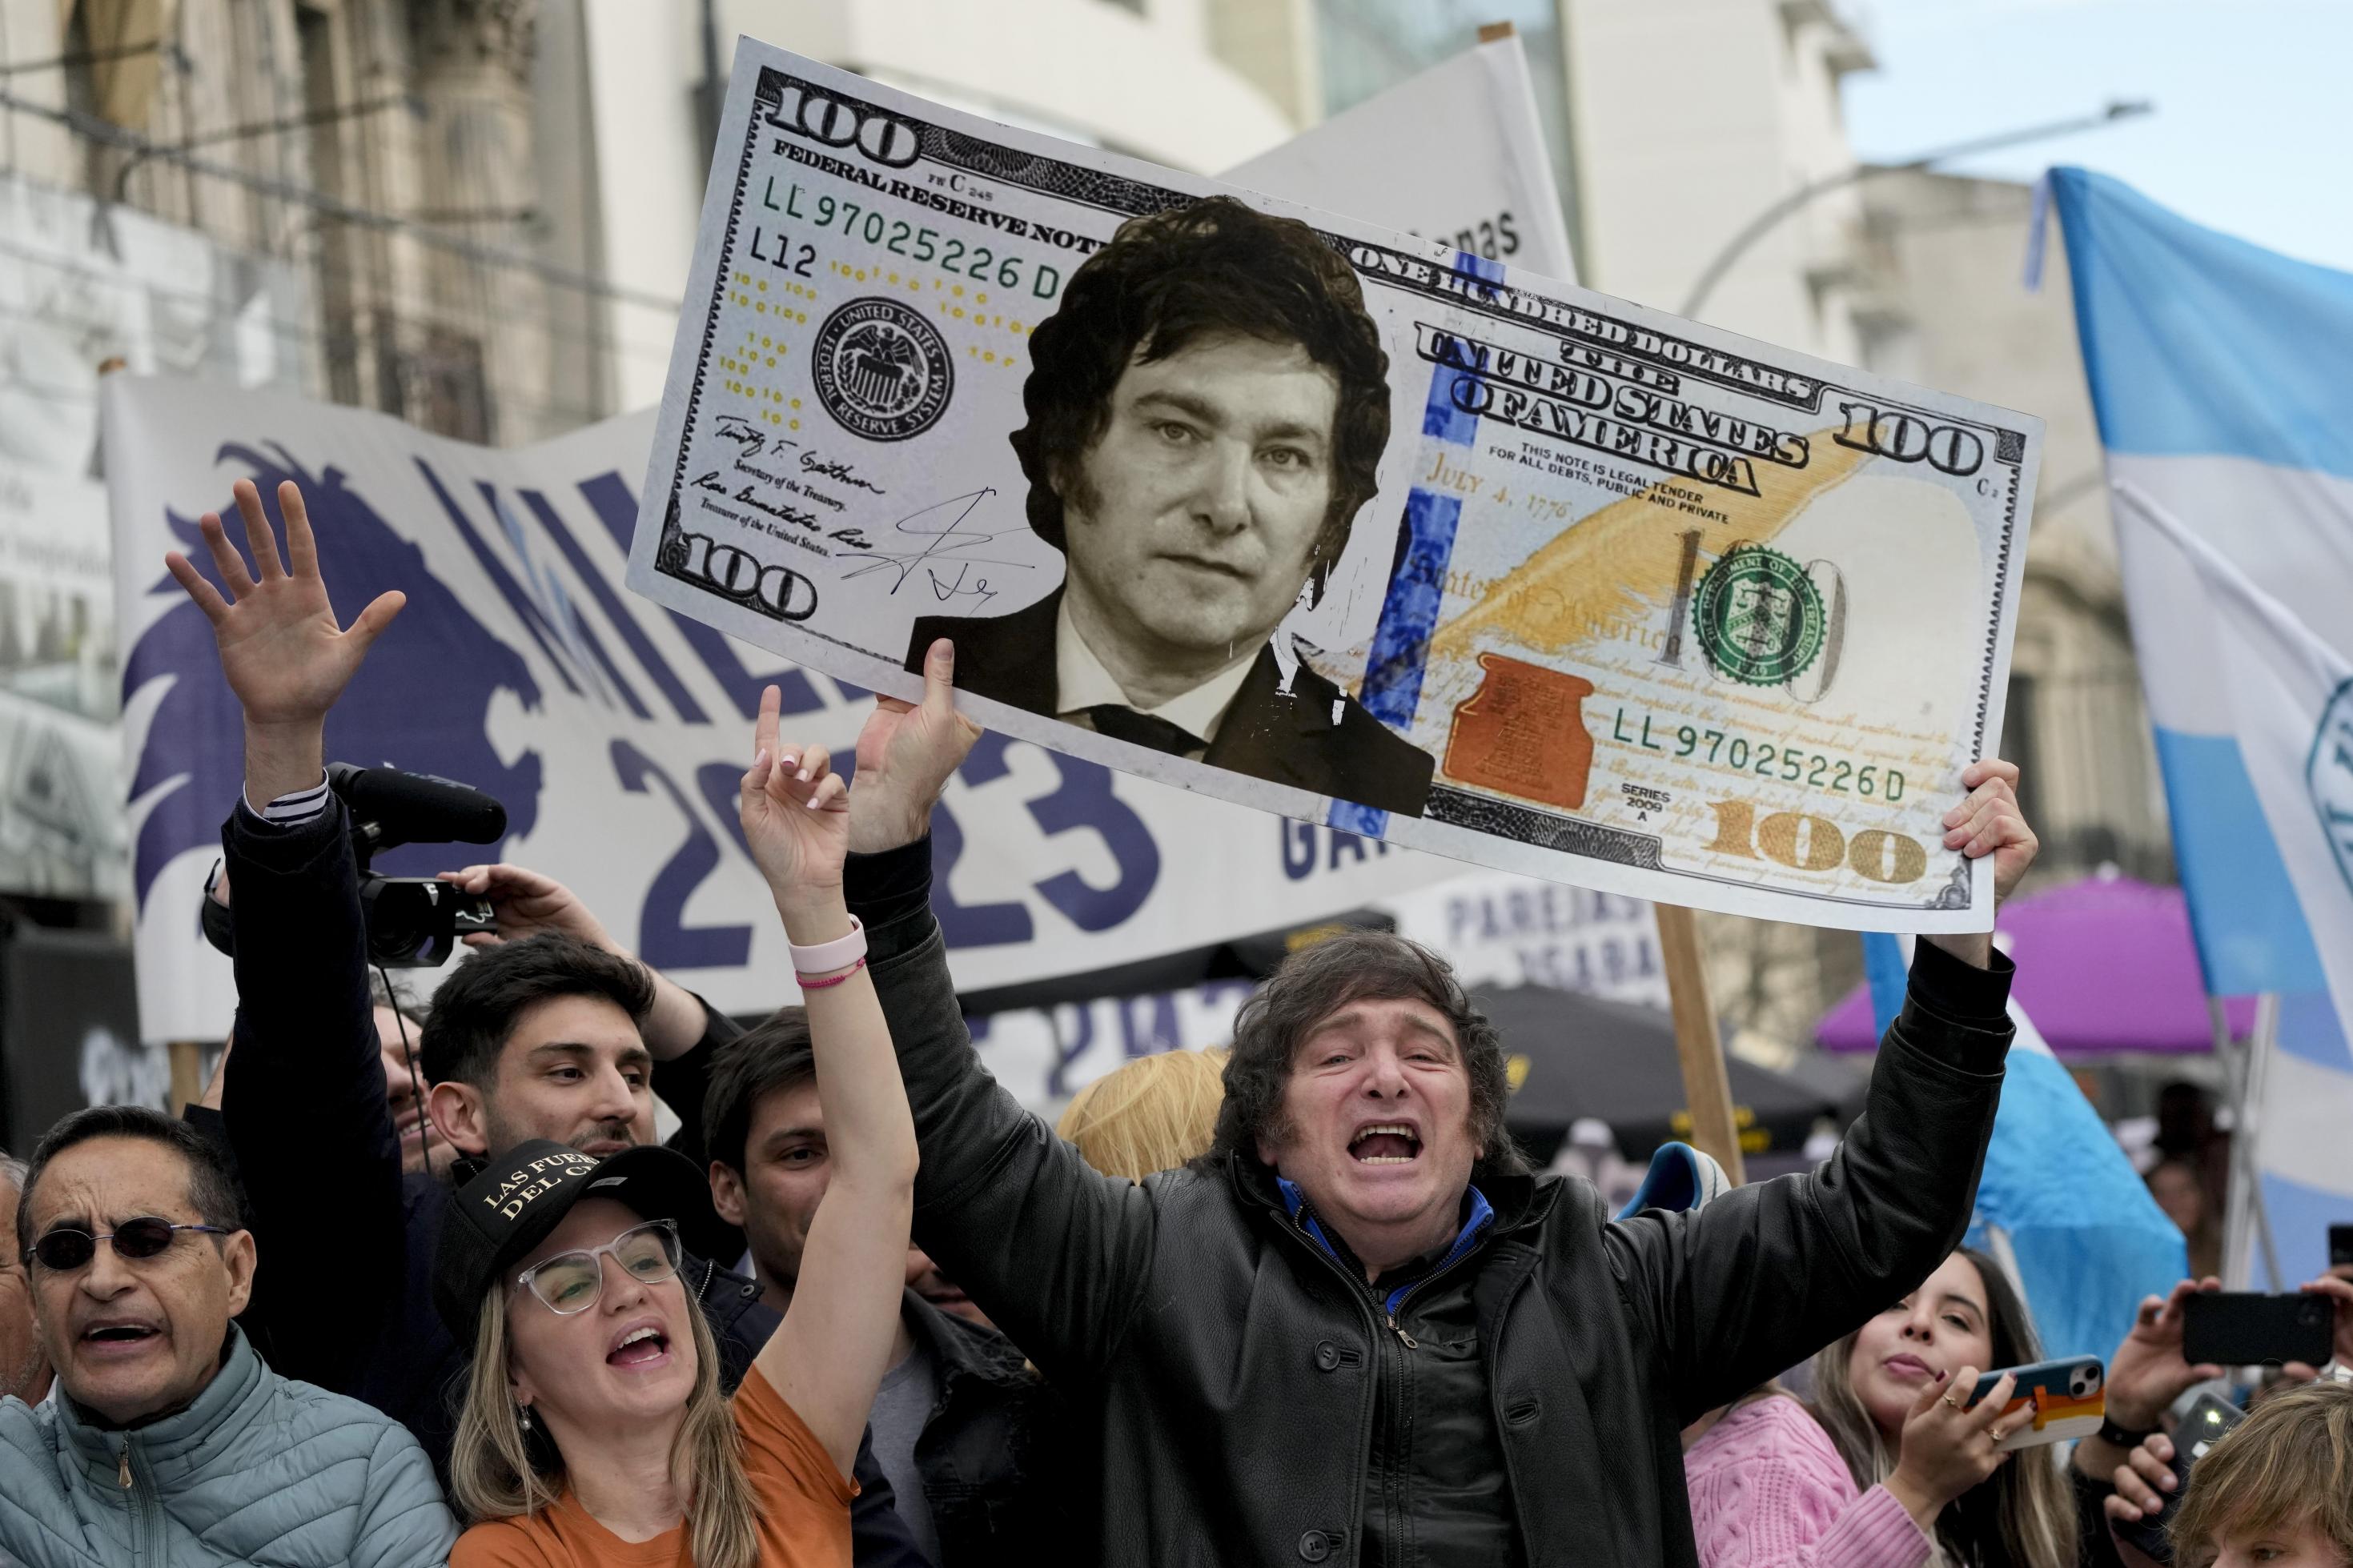 Presidential hopeful of the Liberty Advances coalition Javier Milei, holds up a giant cardboard depicting a U.S. 100 banknote emblazoned with an image of his face, during a rally in La Plata, Argentina, Tuesday, Sept. 12, 2023. The country's economic travails have bolstered Milei, who wants to replace the peso with the dollar, and says that Argentina's Central Bank should be abolished. (AP Photo/Natacha Pisarenko)